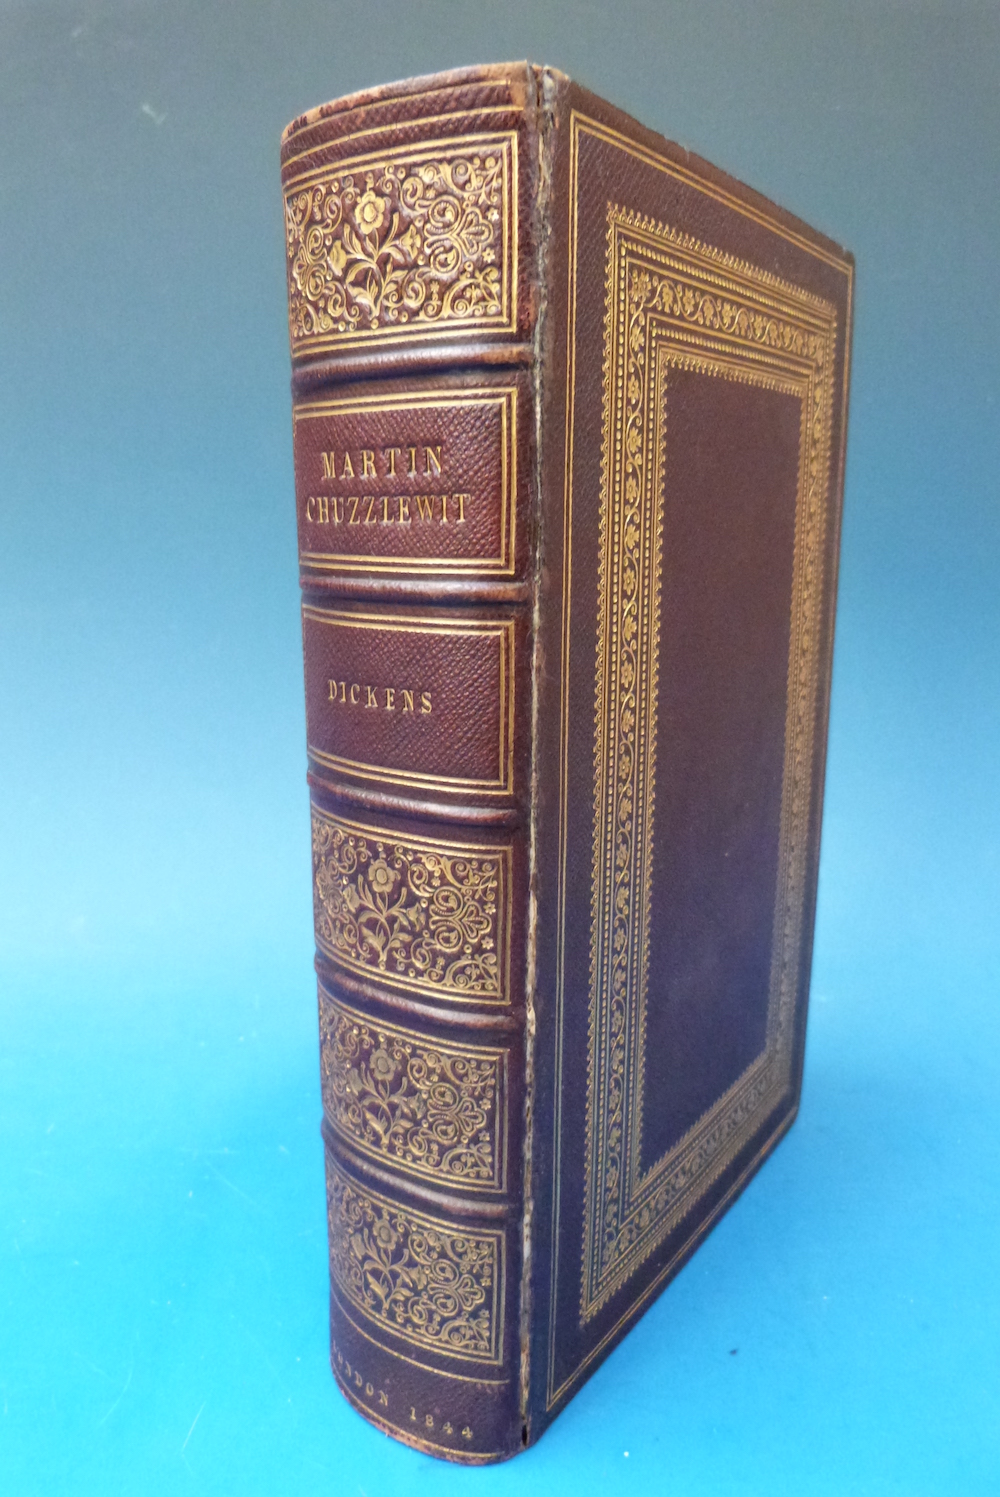 Charles Dickens, Martin Chuzzlewit (Association Copy) Chapman & Hall, London 1844. Sold For £6,200